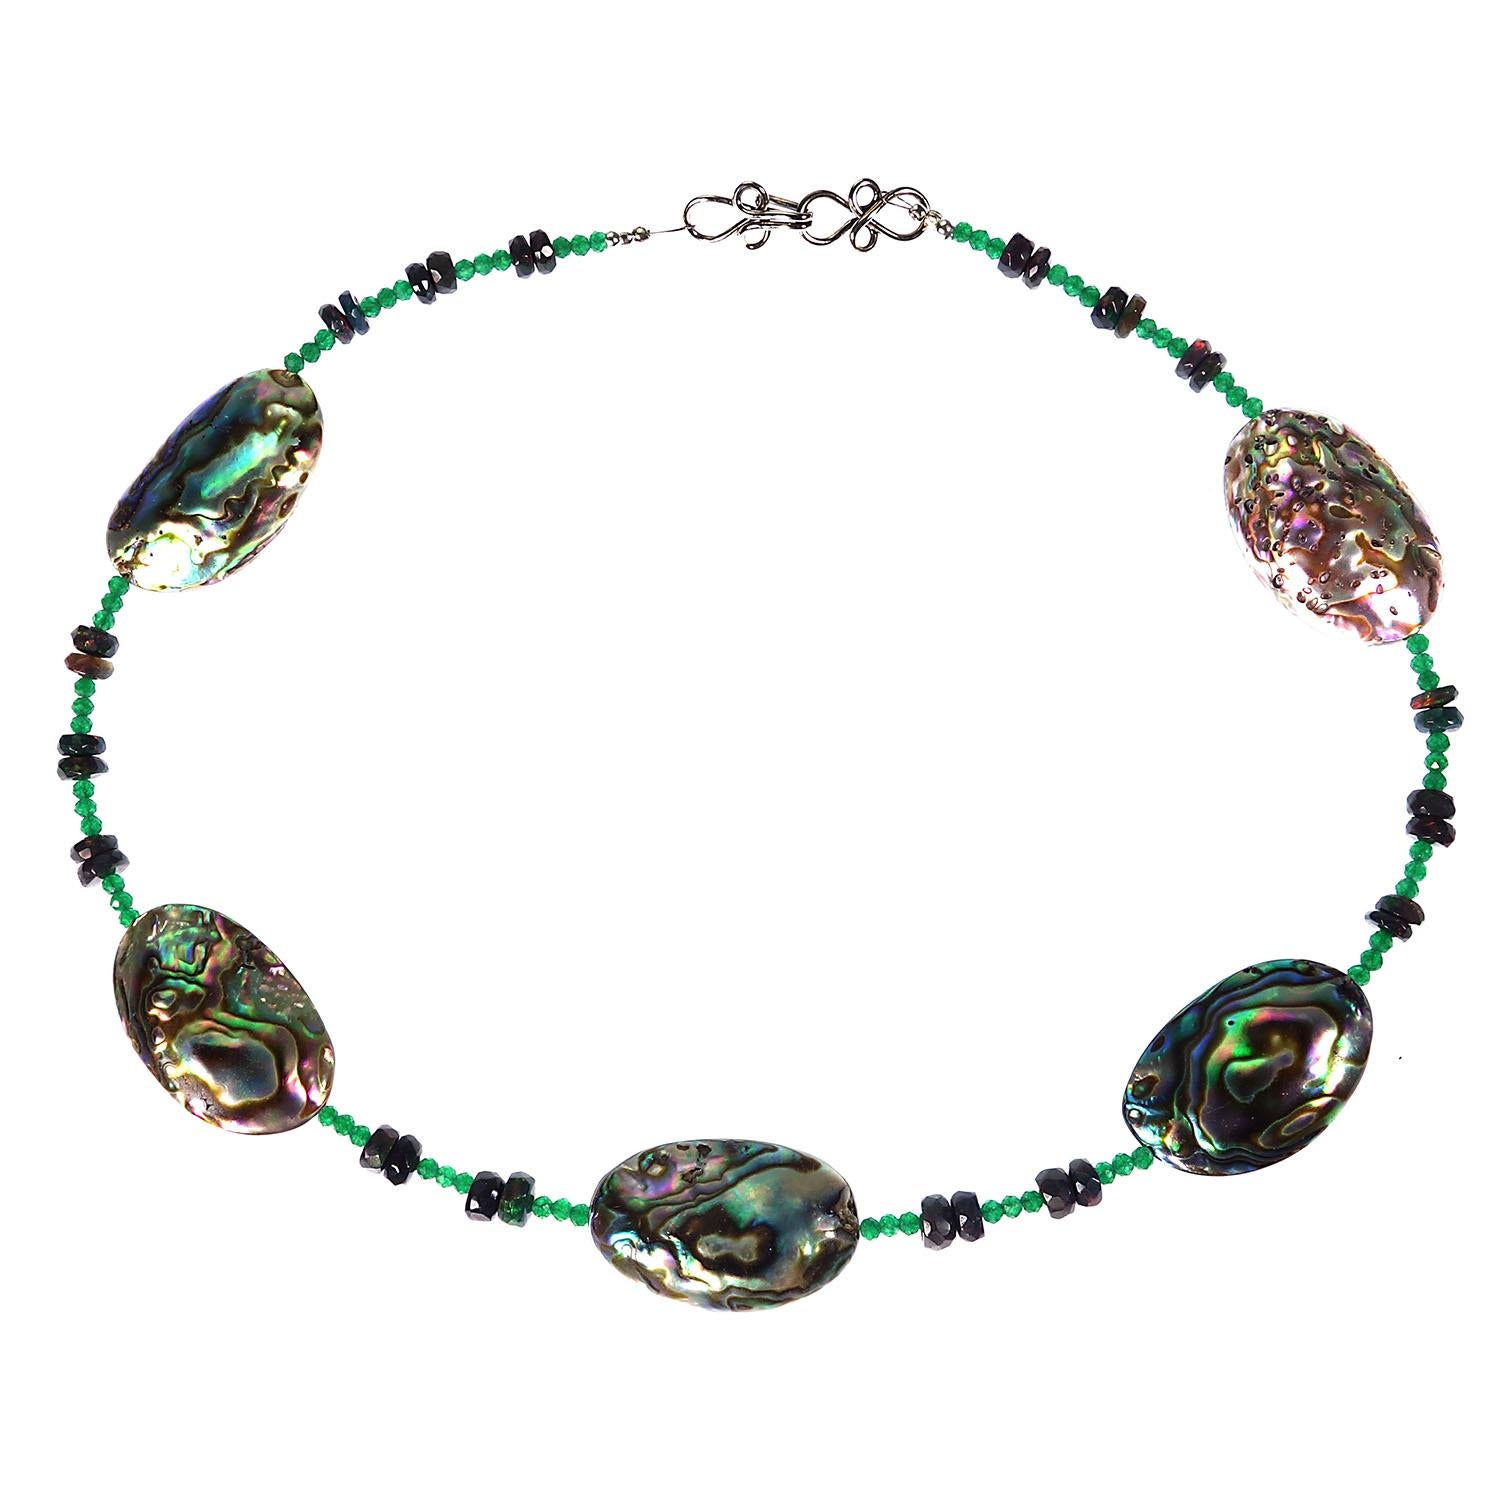 AJD Delicate Choker of Paua Shell, Black Opal, and Green Quartz In New Condition For Sale In Raleigh, NC